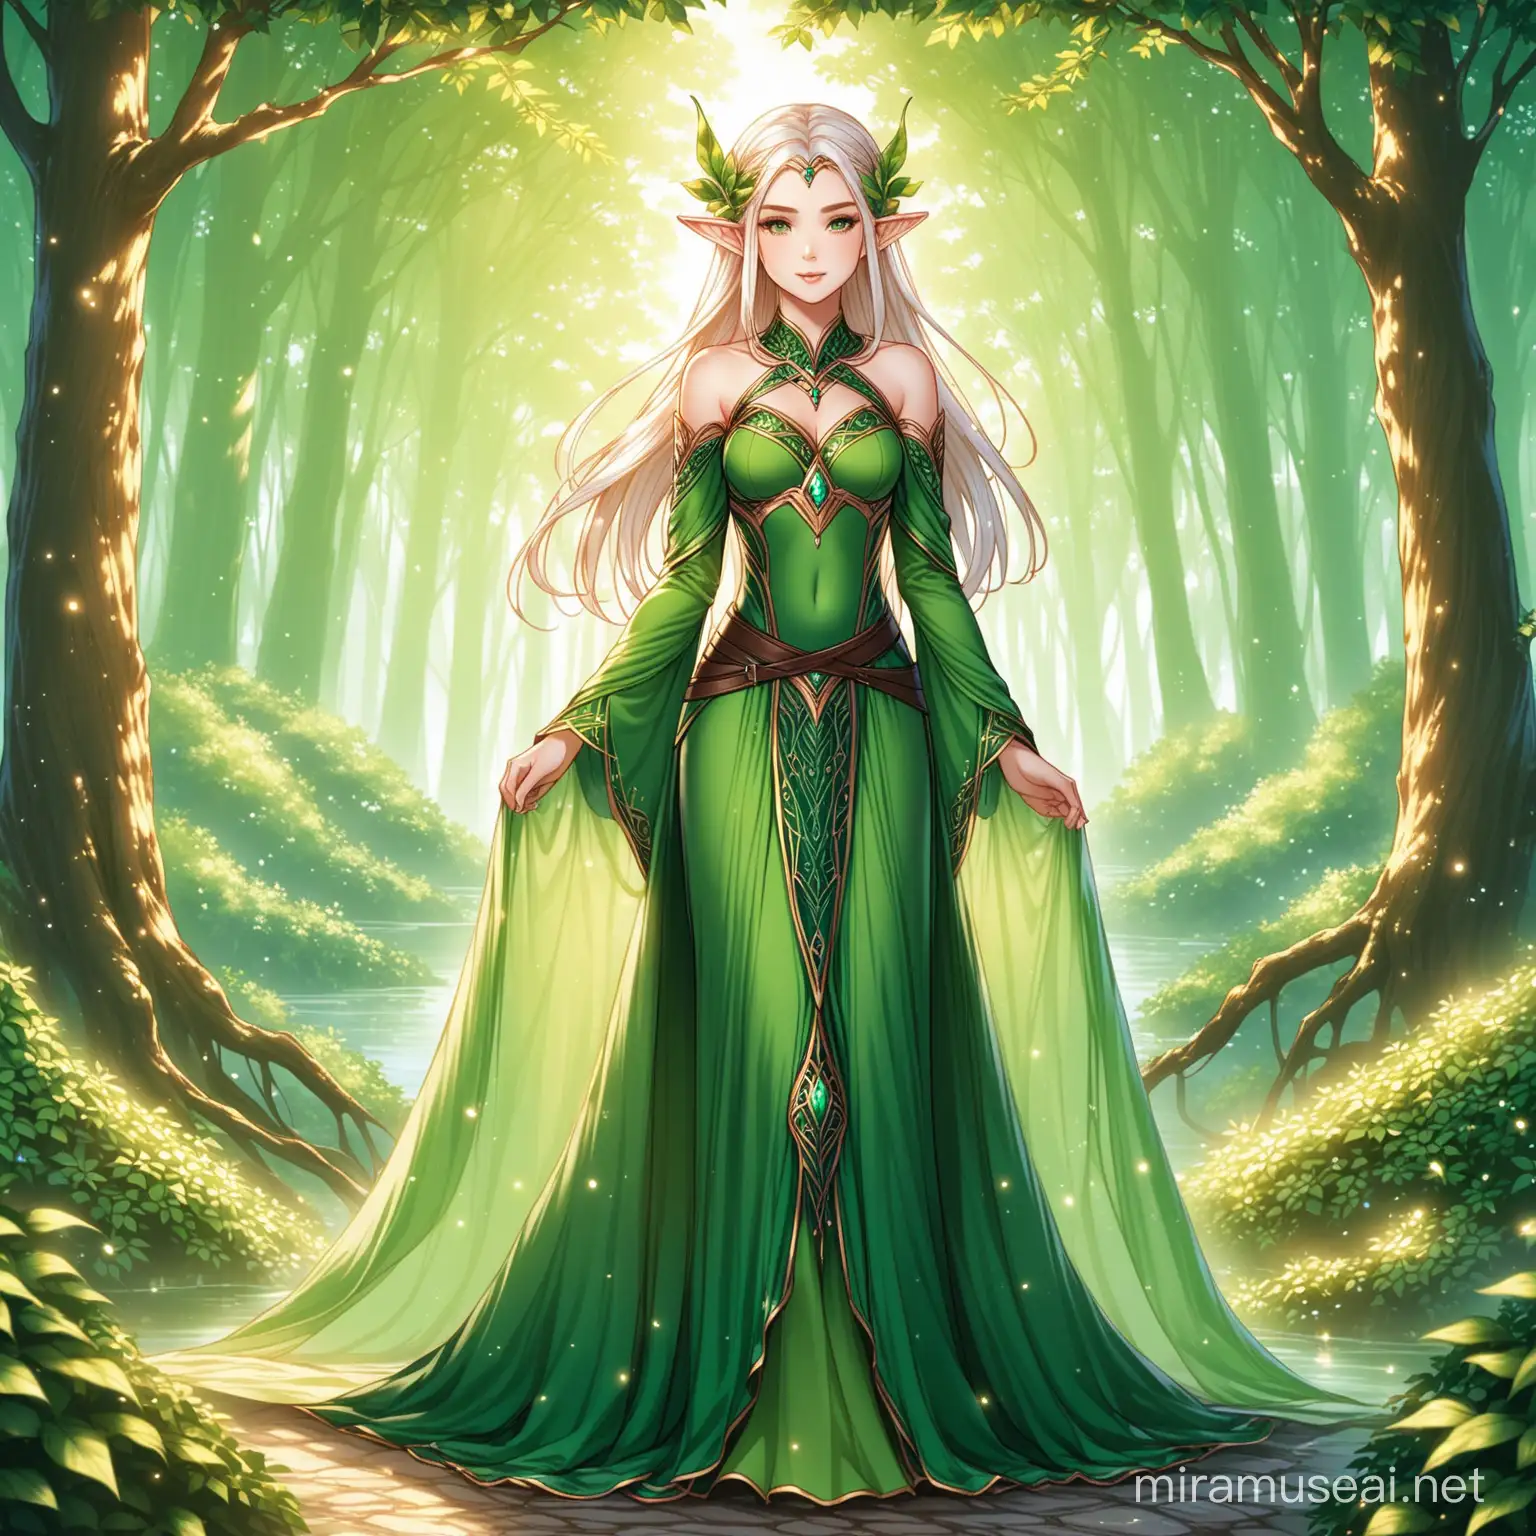 Enchanting Elven Dress Designs for Magical Occasions